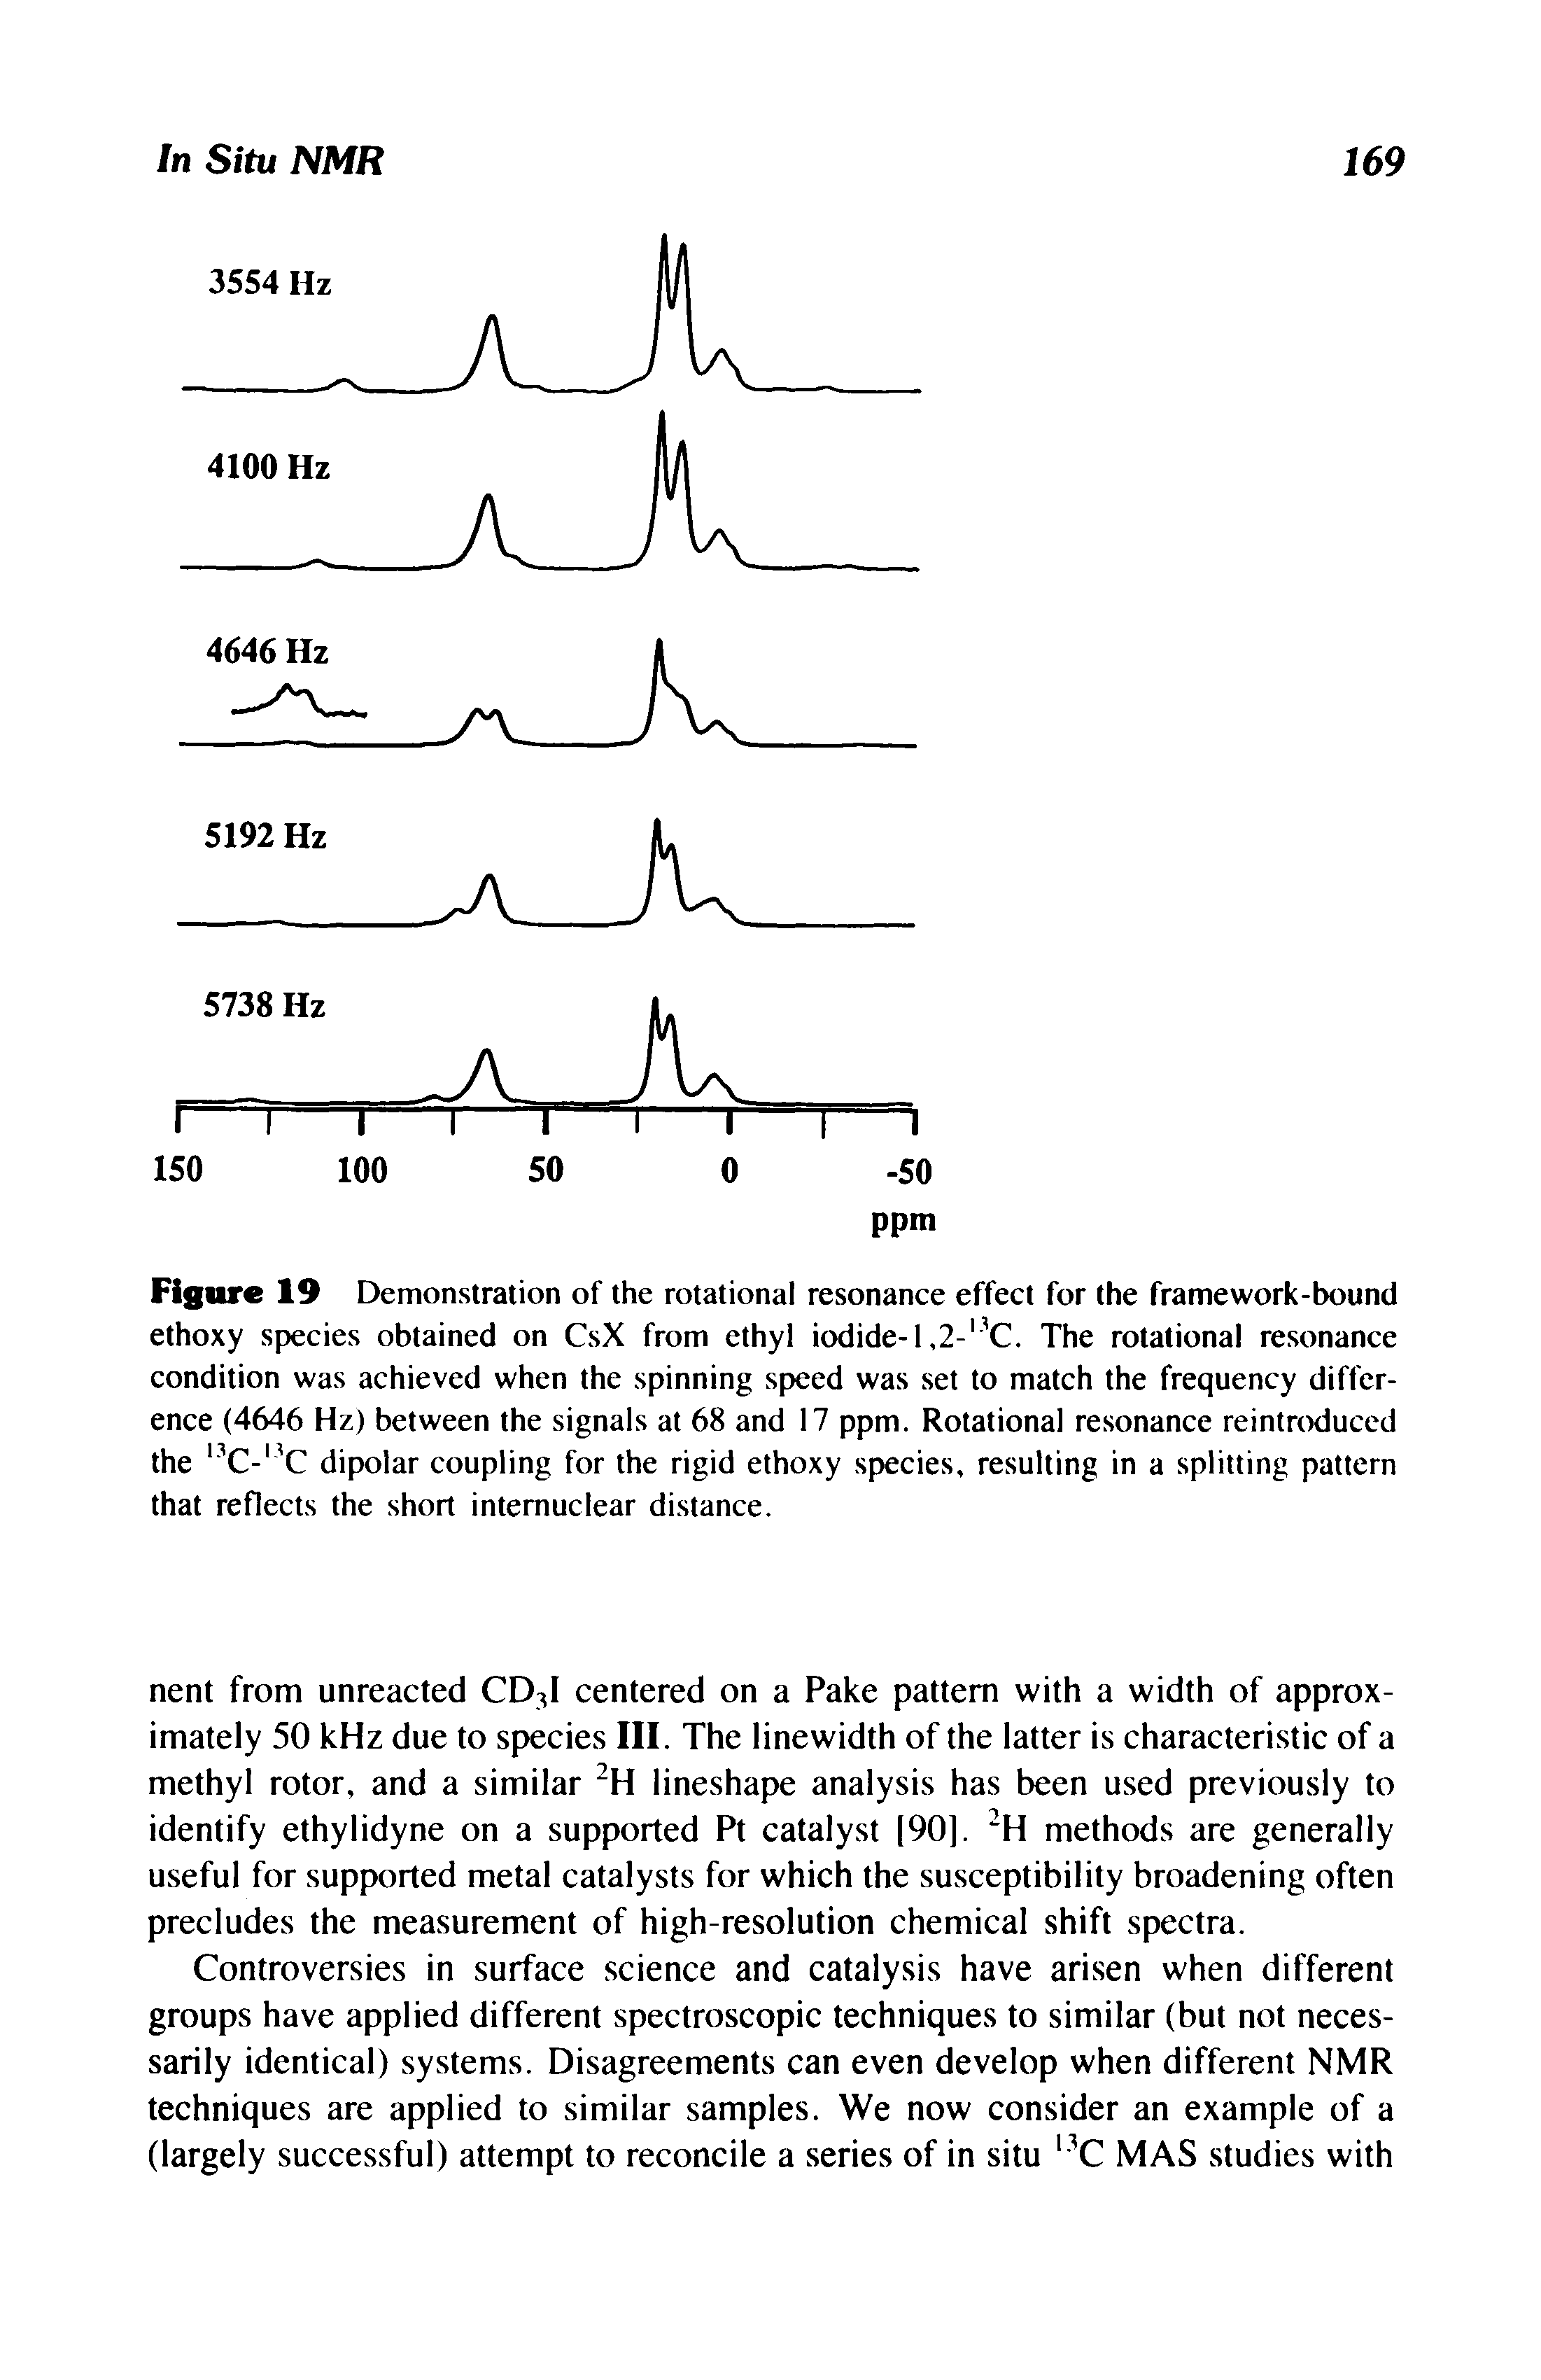 Figure 19 Demonstration of the rotational resonance effect for the framework-bound ethoxy species obtained on CsX from ethyl iodide-1,2- C. The rotational resonance condition was achieved when the spinning speed was set to match the frequency difference (4646 Hz) between the signals at 68 and 17 ppm. Rotational resonance reintroduced the C- C dipolar coupling for the rigid ethoxy species, resulting in a splitting pattern that reflects the short intemuclear distance.